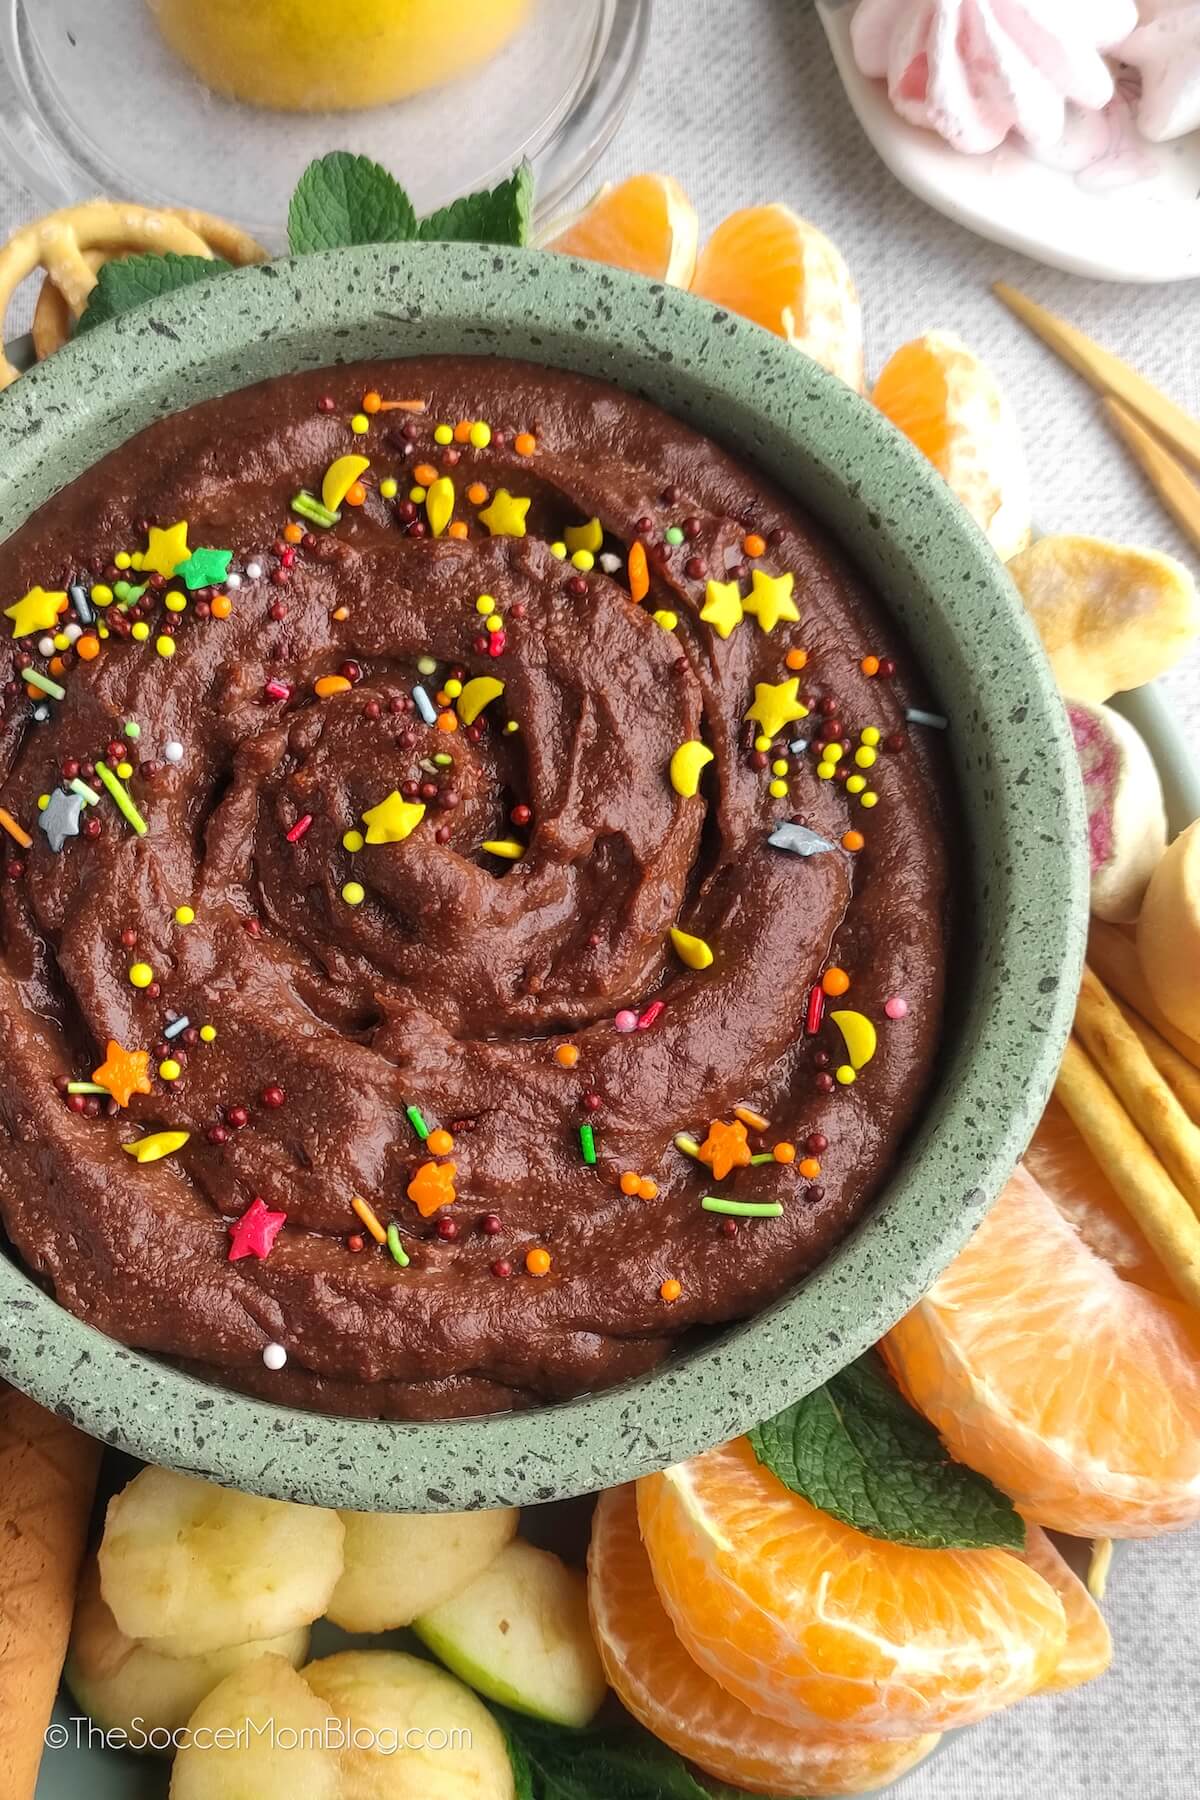 chocolate hummus with fruit for dipping